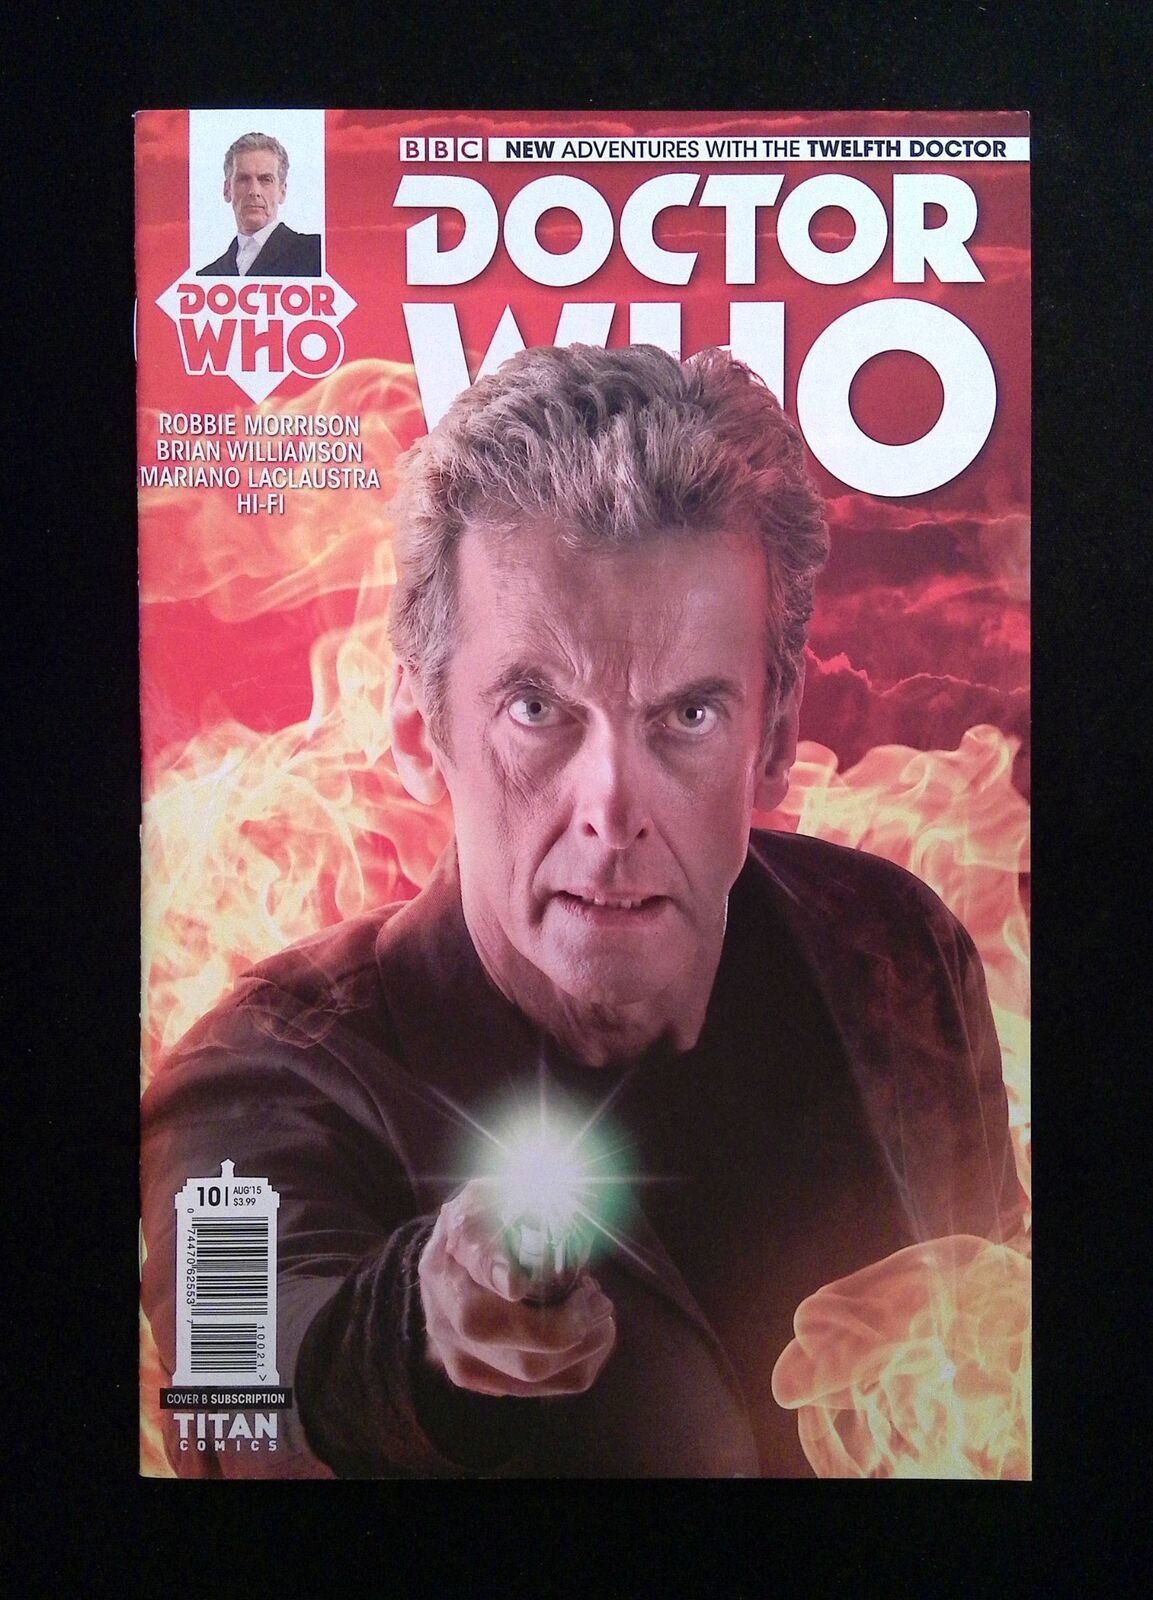 Doctor Who The Twelfth Doctor #10B  TITAN Comics 2015 NM-  VARIANT COVER